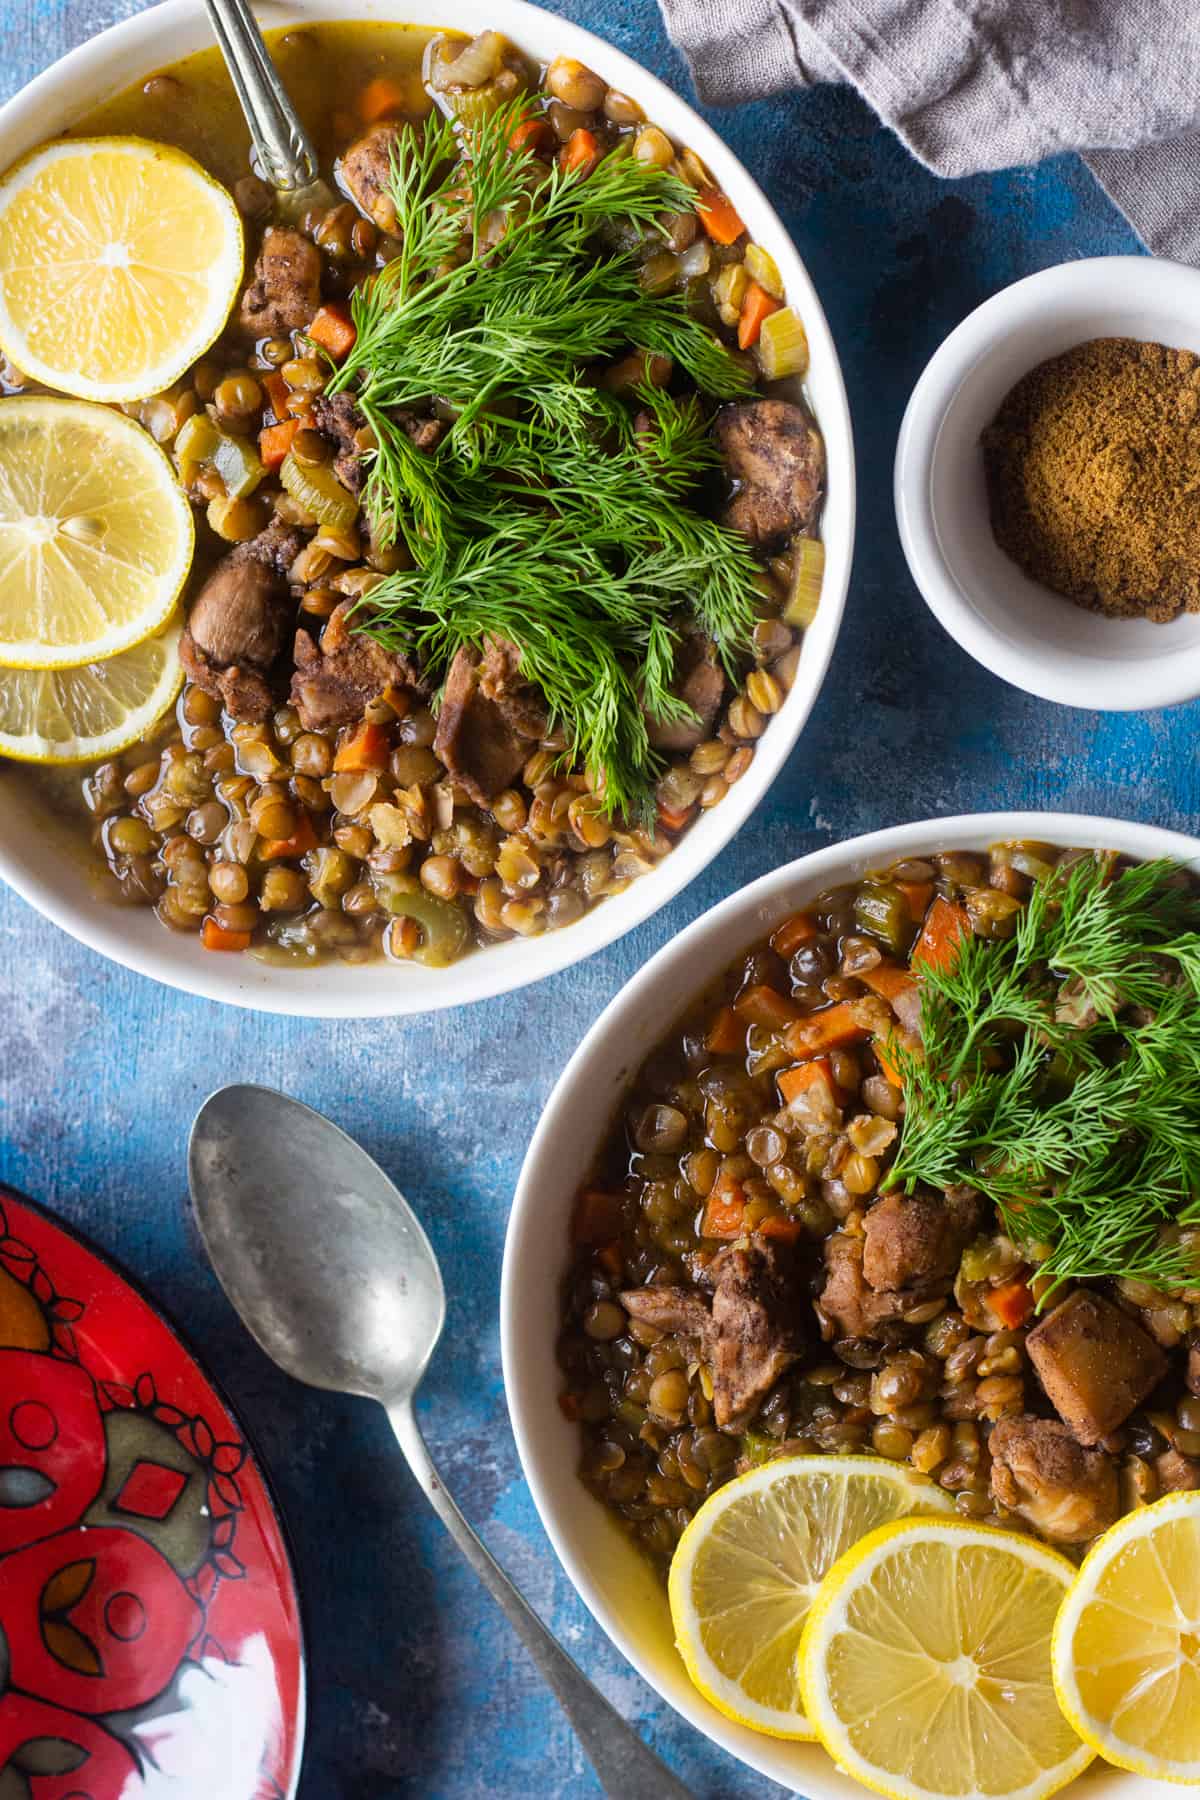 easy healthy dinner ideas - Enjoy an easy chicken lentil soup that's full of Mediterranean flavor. Seasoned with warm spices and packed with veggies, this soup is all you need for a hearty dinner.